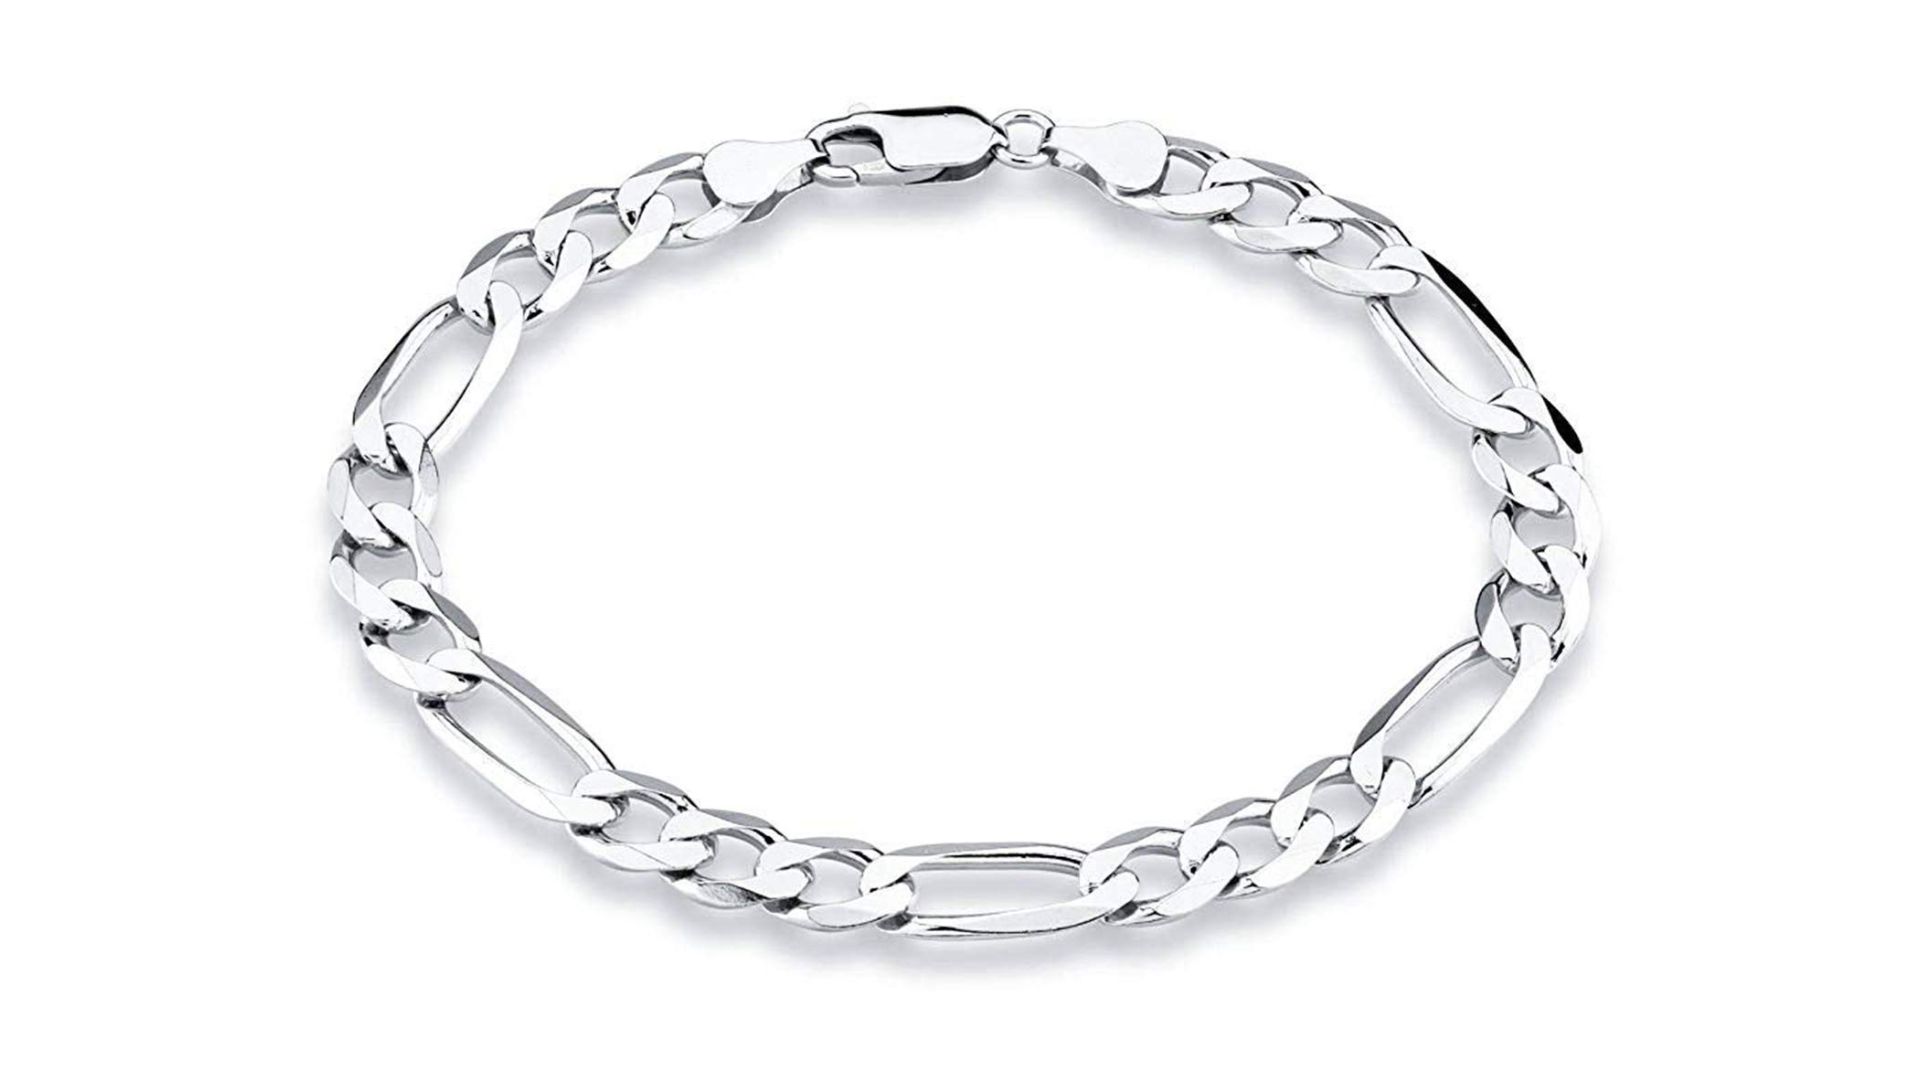 Silver Chain Bracelet With White Background